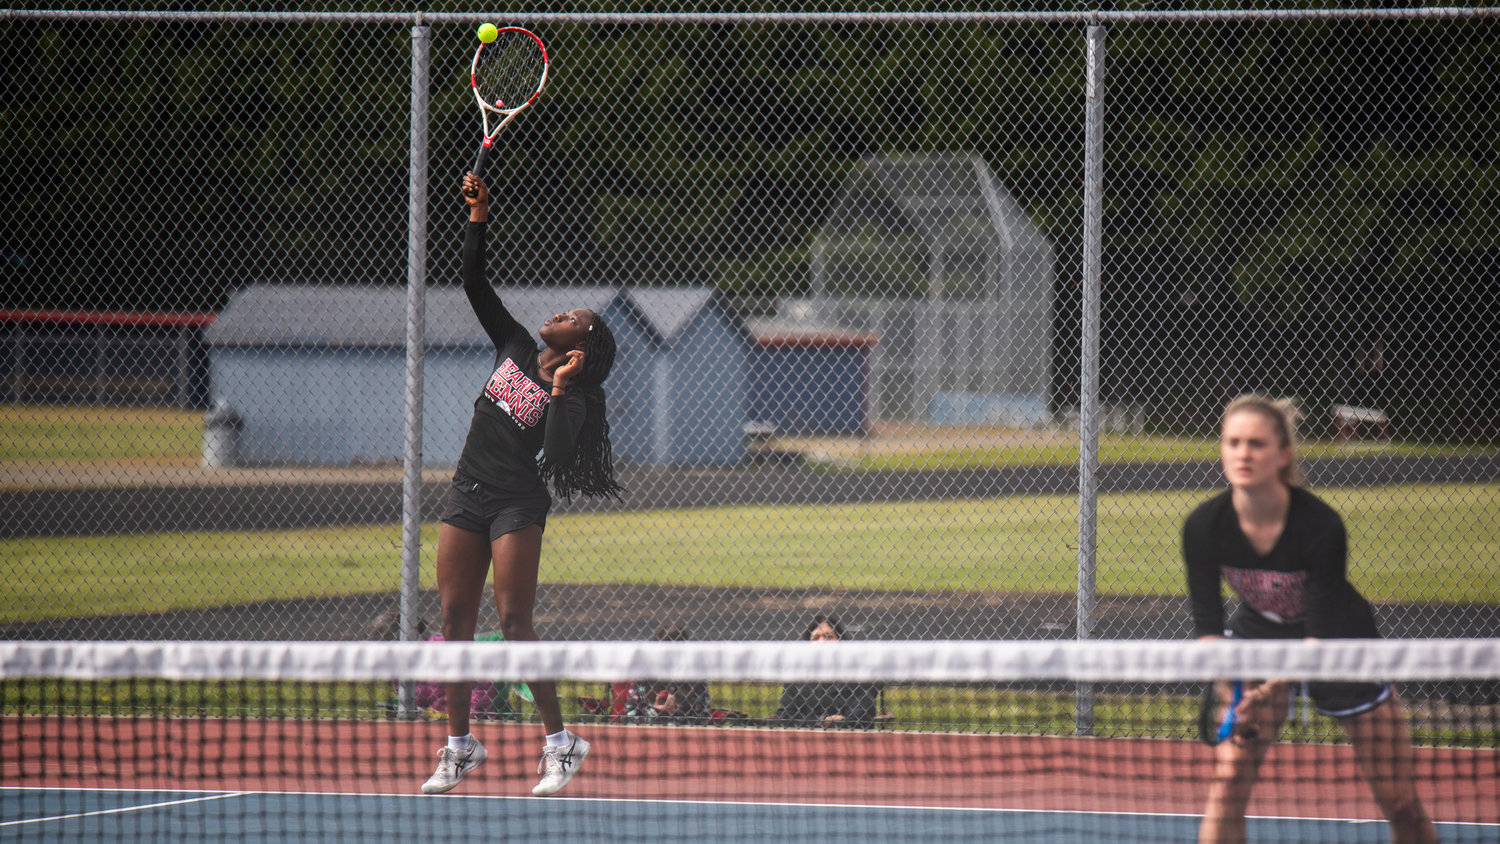 W.F. West’s Mariama Ceesay serves alongside her partner Kaylynne Dowling during a doubles match at A.G. West Black Hills High School Tuesday afternoon in Tumwater.